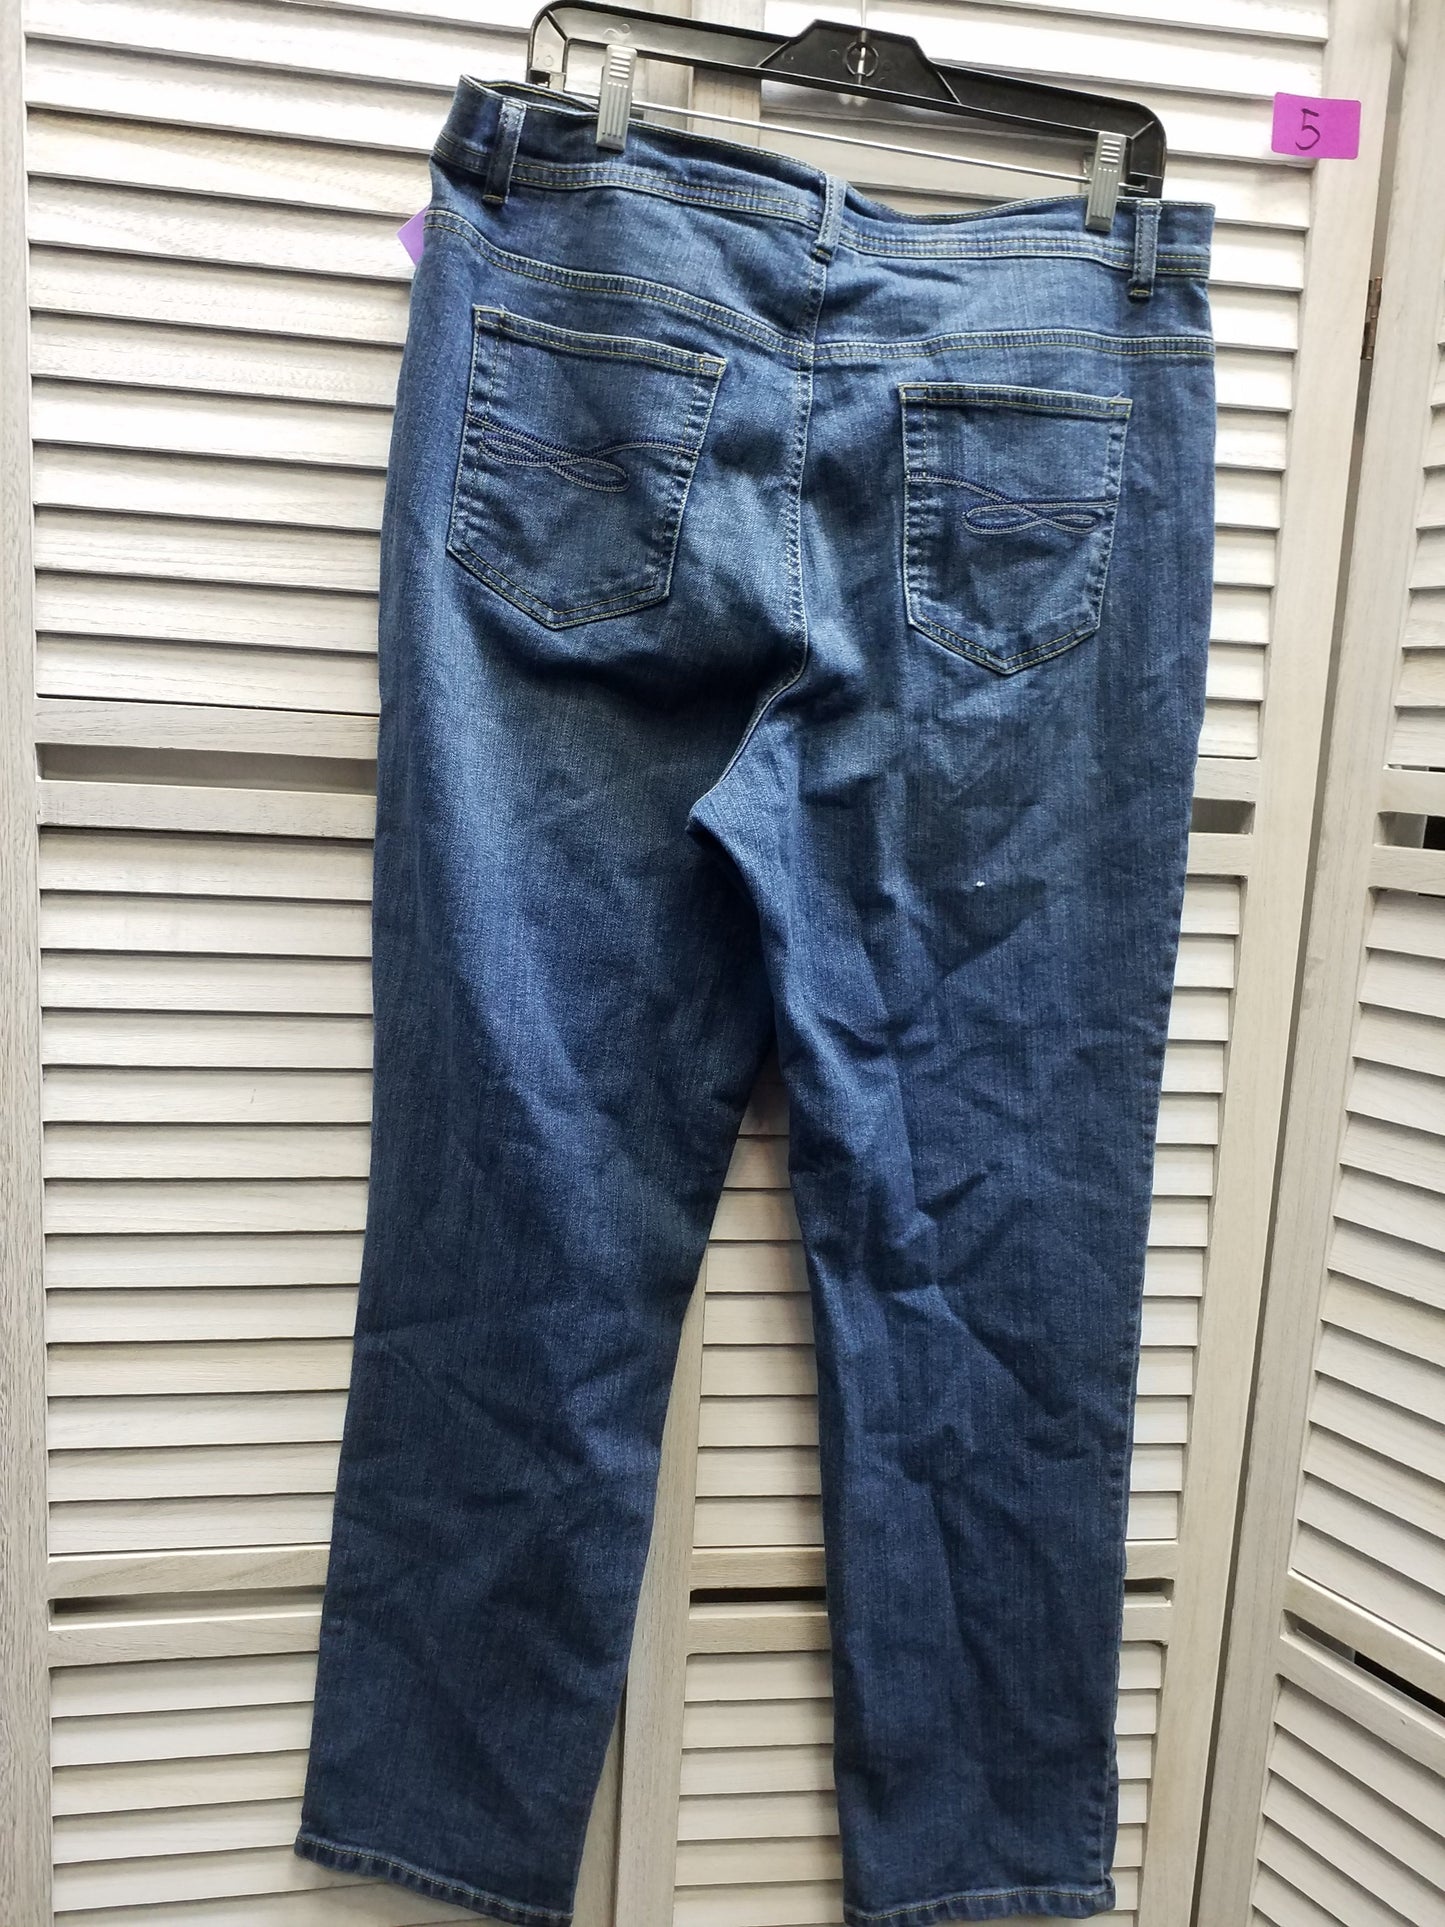 Blue Denim Jeans Straight Style And Company, Size 16